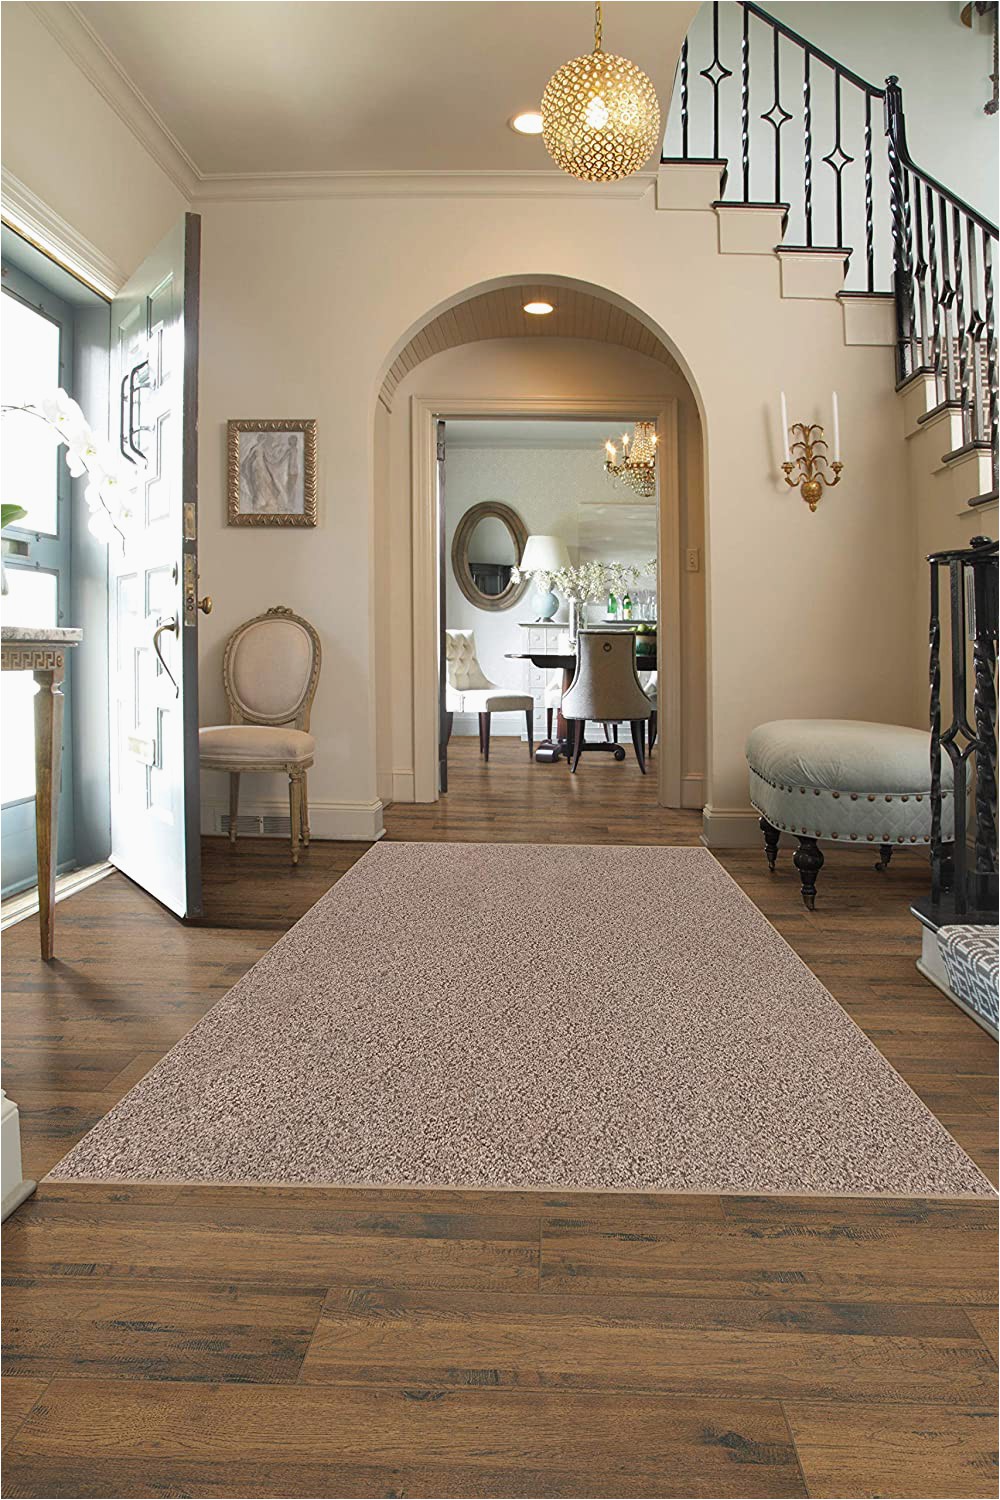 12 Ft Round area Rugs Square 12 X12 Indoor area Rug Oyster Bay 32oz Plush Textured Carpet for Residential or Mercial Use with Premium Bound Polyester Edges